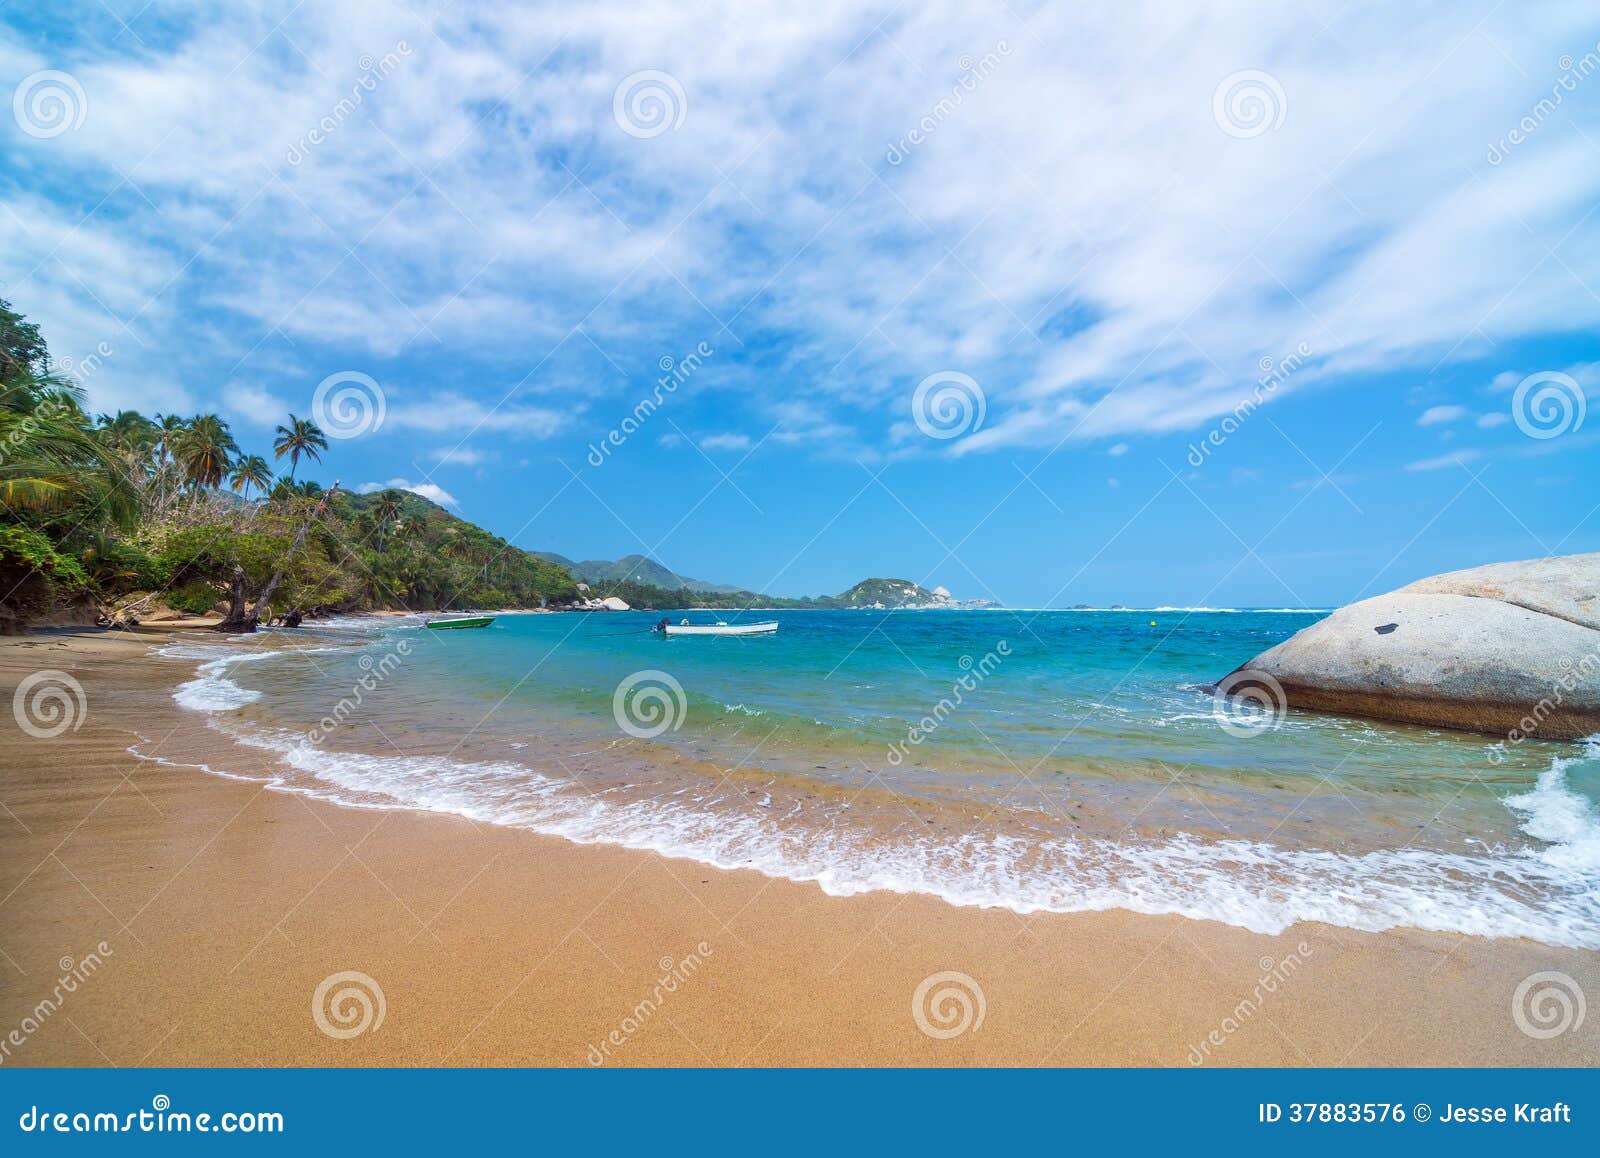 caribbean beach in colombia